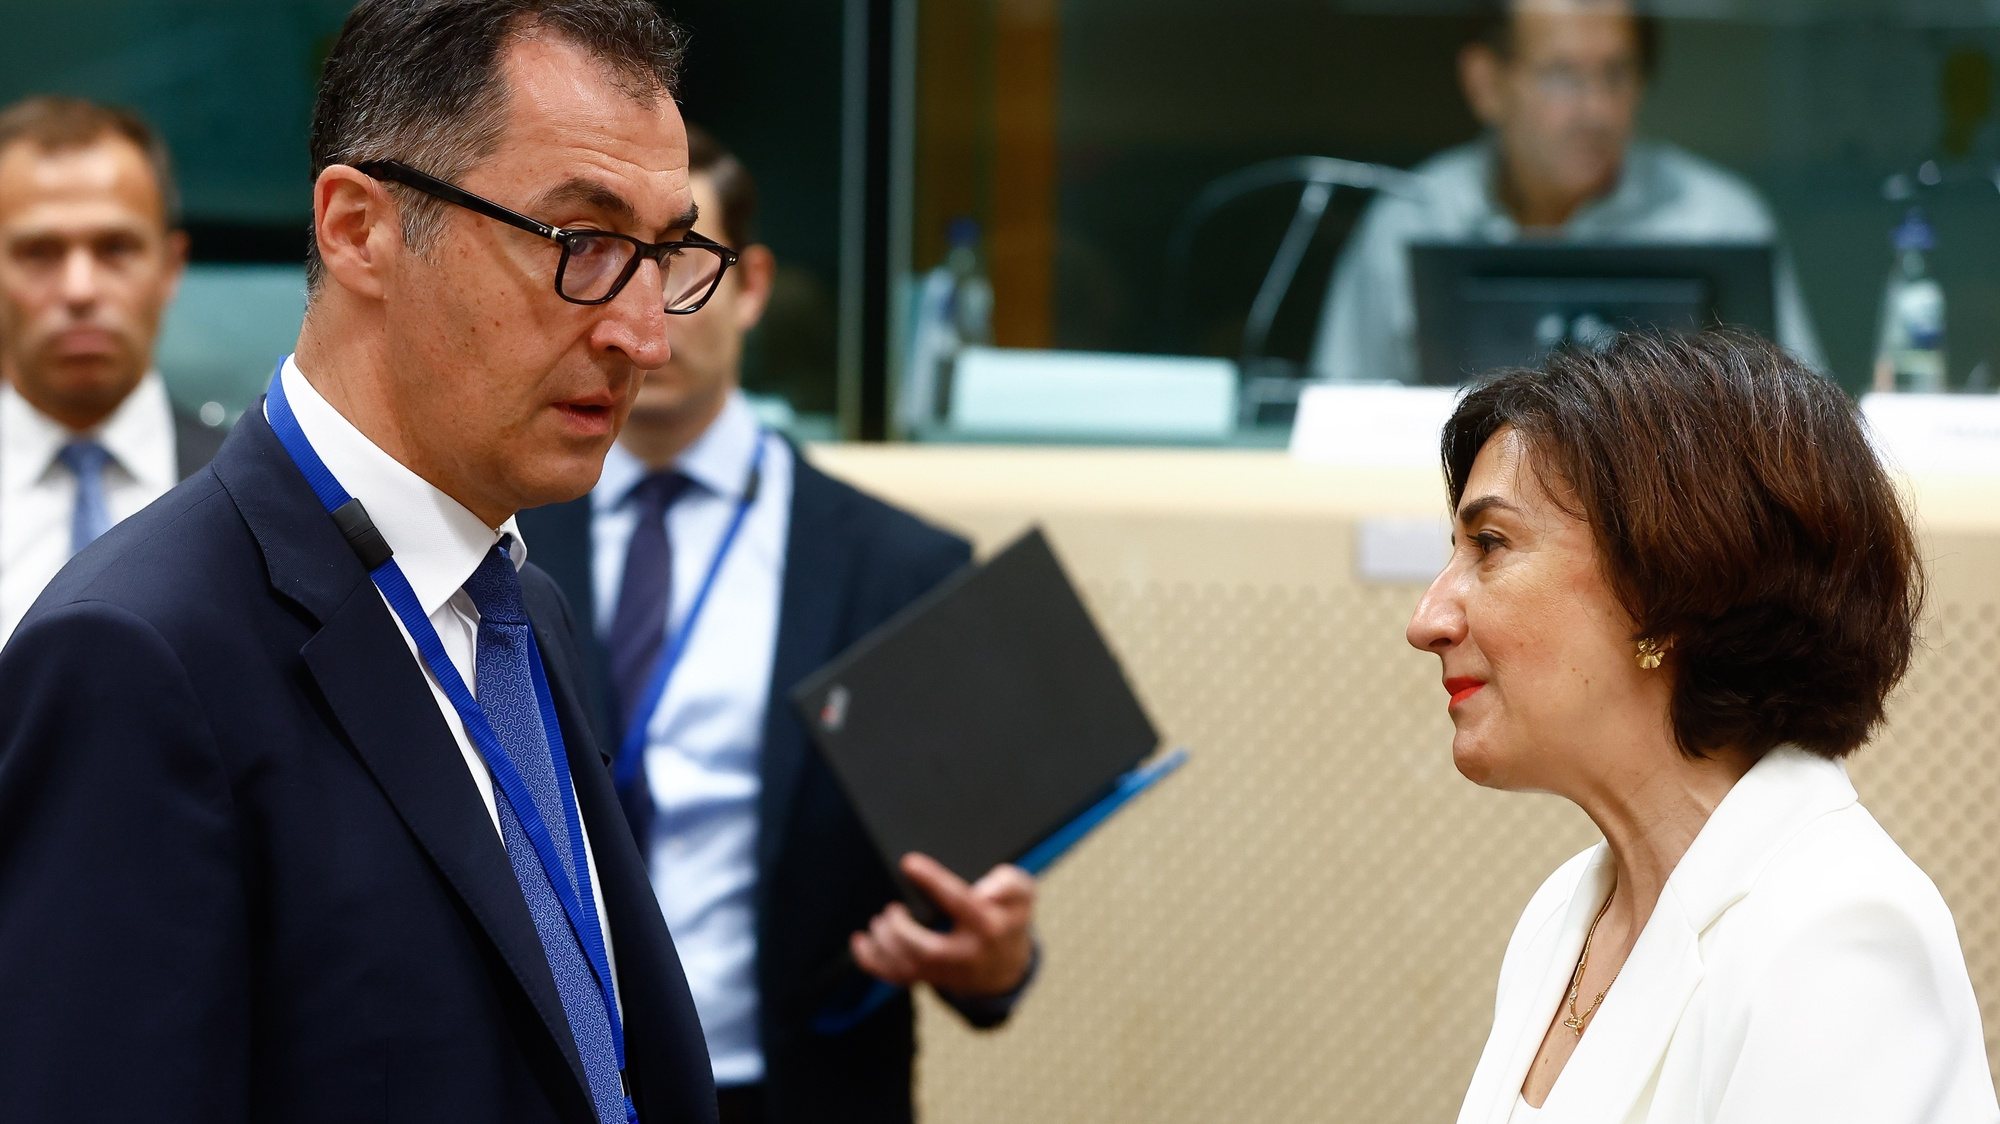 epa10077333 German Minister for Food and Agriculture Cem Oezdemir (L) and Portugal&#039;s Minister for Agriculture, Forestry and Rural Development Maria do Ceu Antunes (R) chat prior to the start of an Agriculture and Fisheries Council meeting at the European Council in Brussels, Belgium, 18 July 2022. The EU agriculture meet &#039;to discuss the recent Commission&#039;s proposal on the regulation on the sustainable use of plant protection products and agree on a set of conclusions for the aquaculture sector&#039; They will also &#039;receive a presentation by the Czech presidency regarding its main priorities in the agriculture and fisheries sectors, the EU Council&#039;s calandar announced.  EPA/STEPHANIE LECOCQ